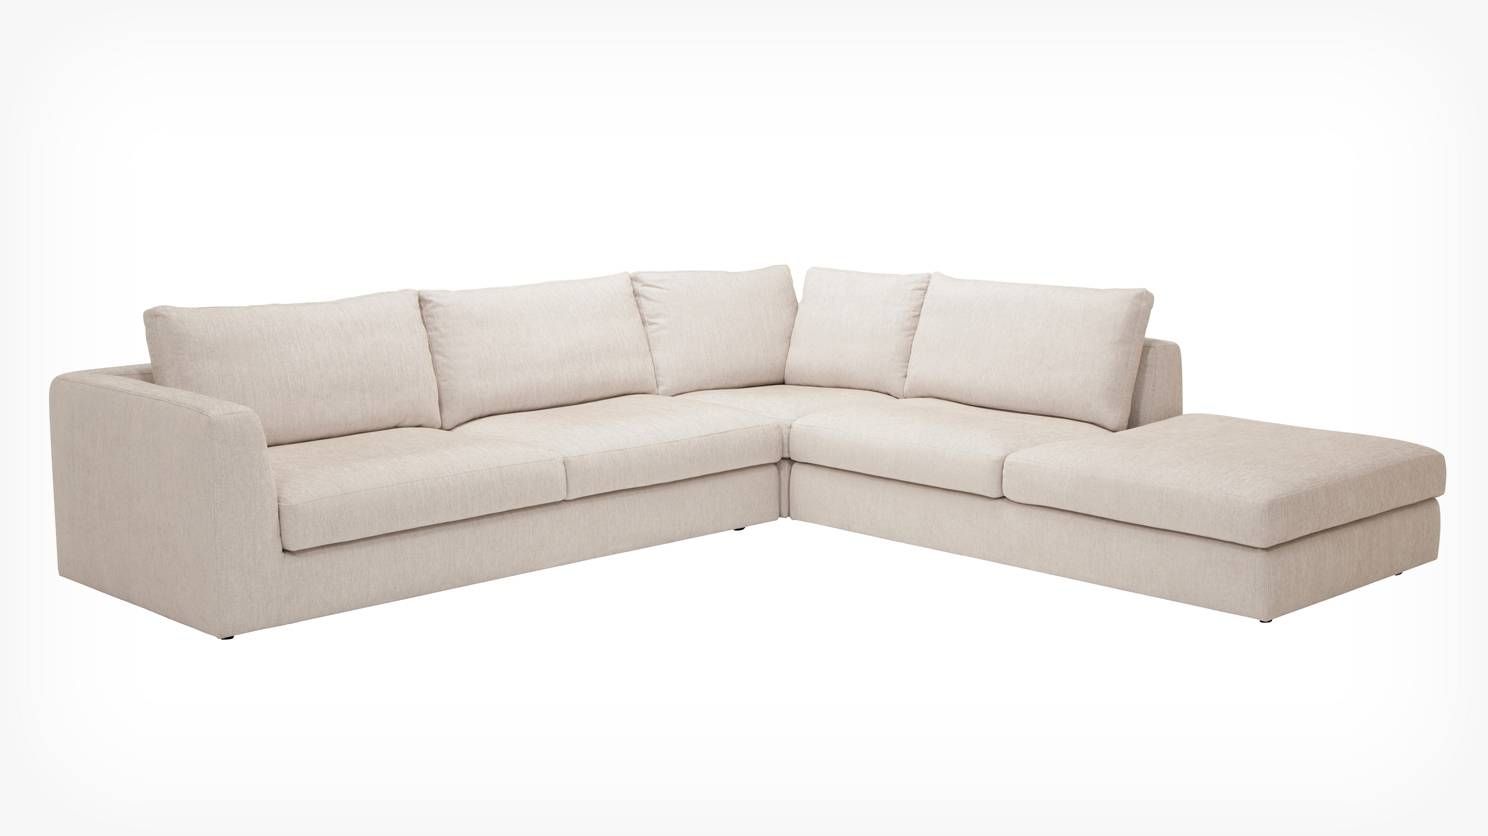 Eq3 | Cello 3 Piece Sectional Sofa With Backless Chaise – Fabric With Backless Sectional Sofa (View 19 of 30)